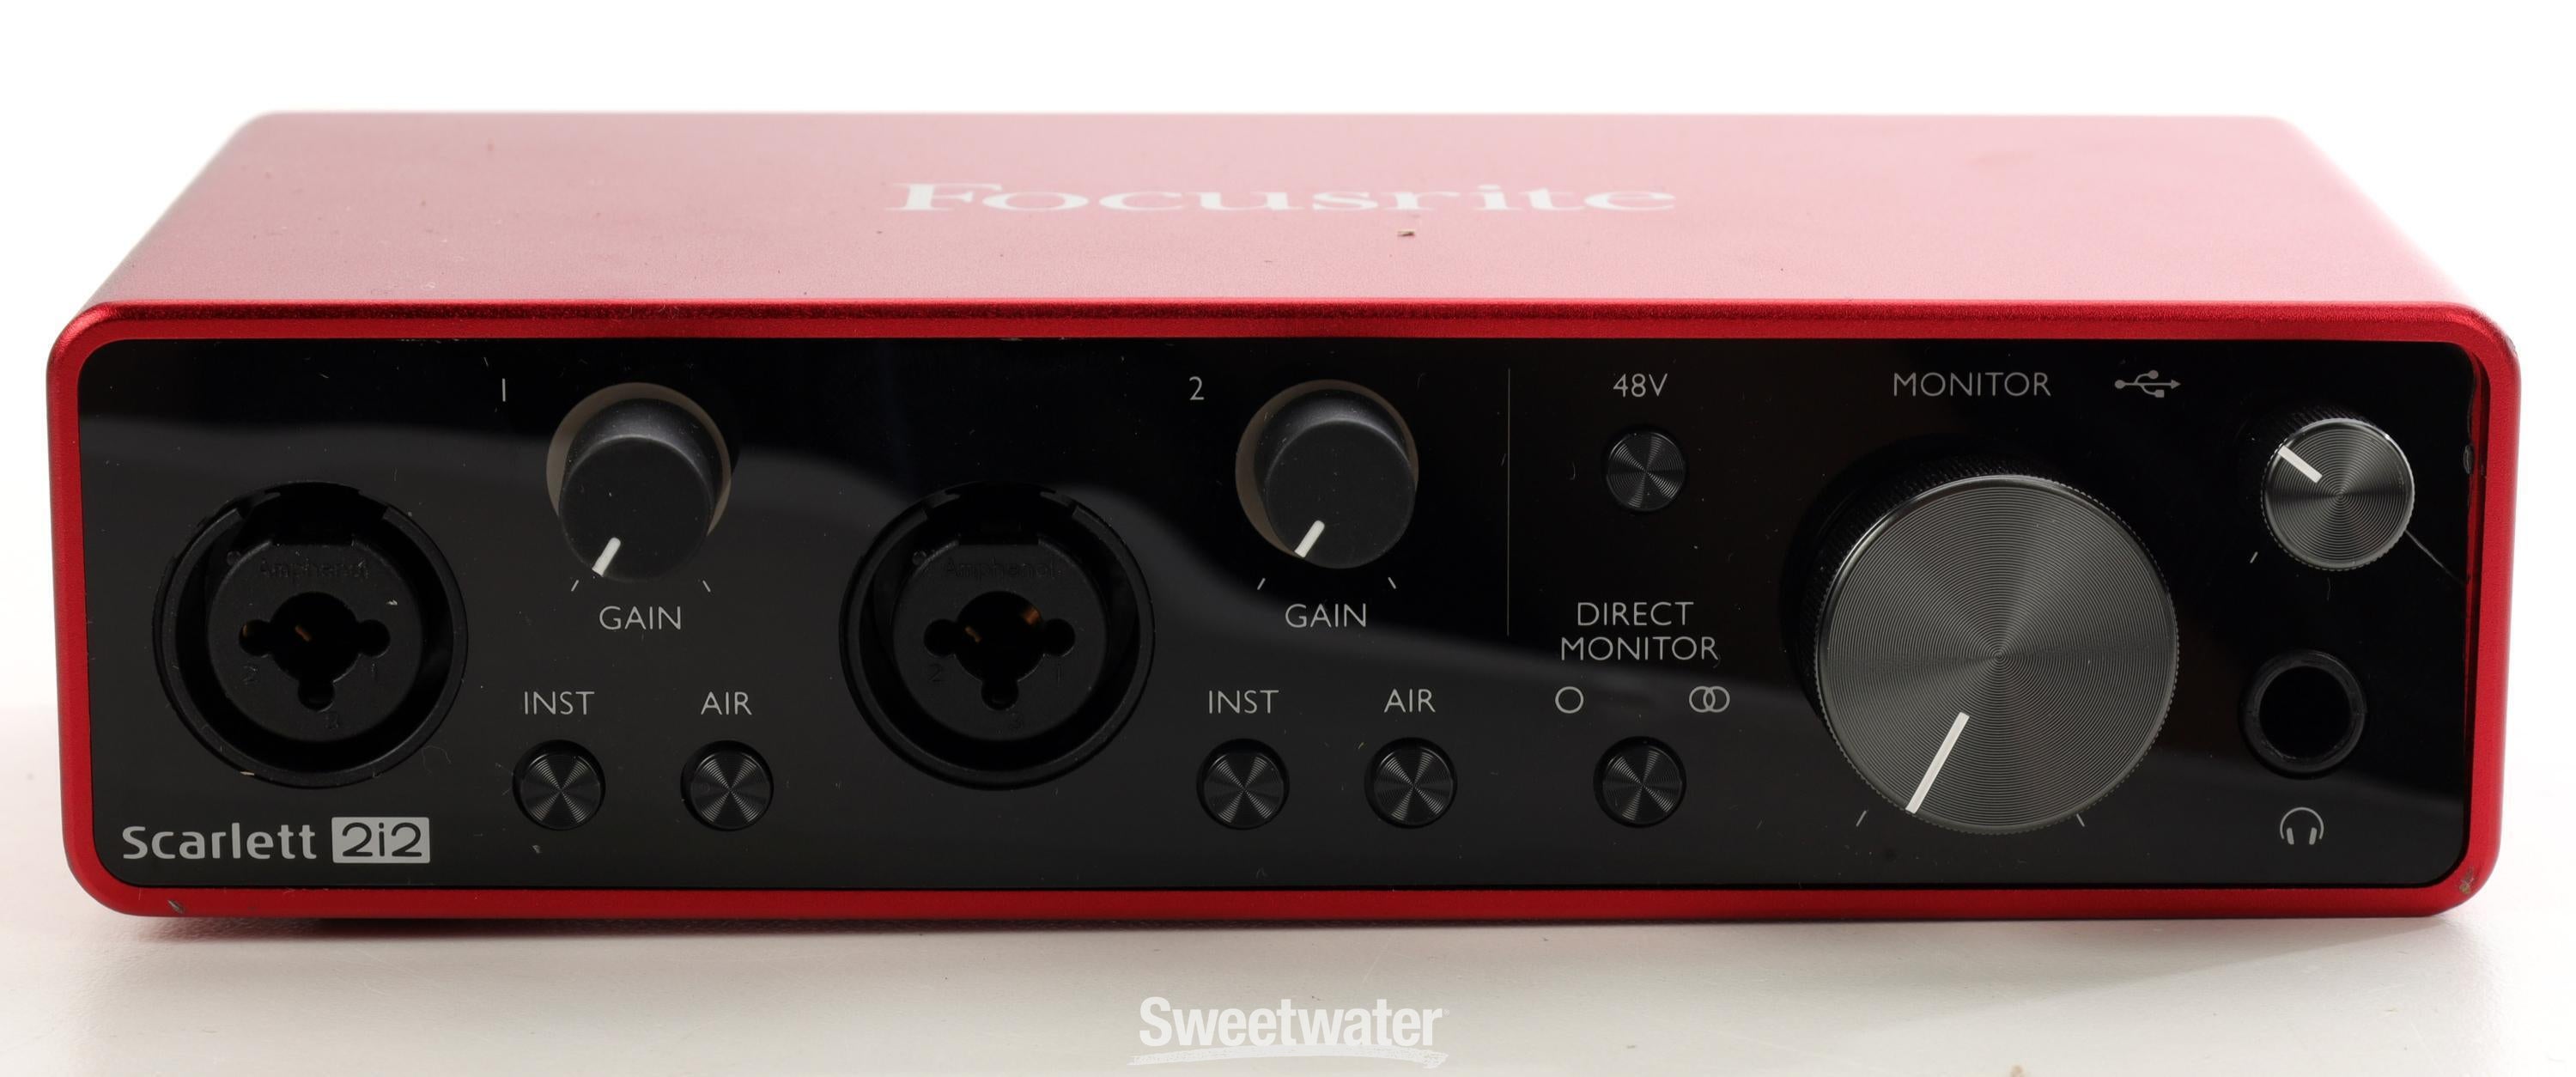 Focusrite | Sweetwater